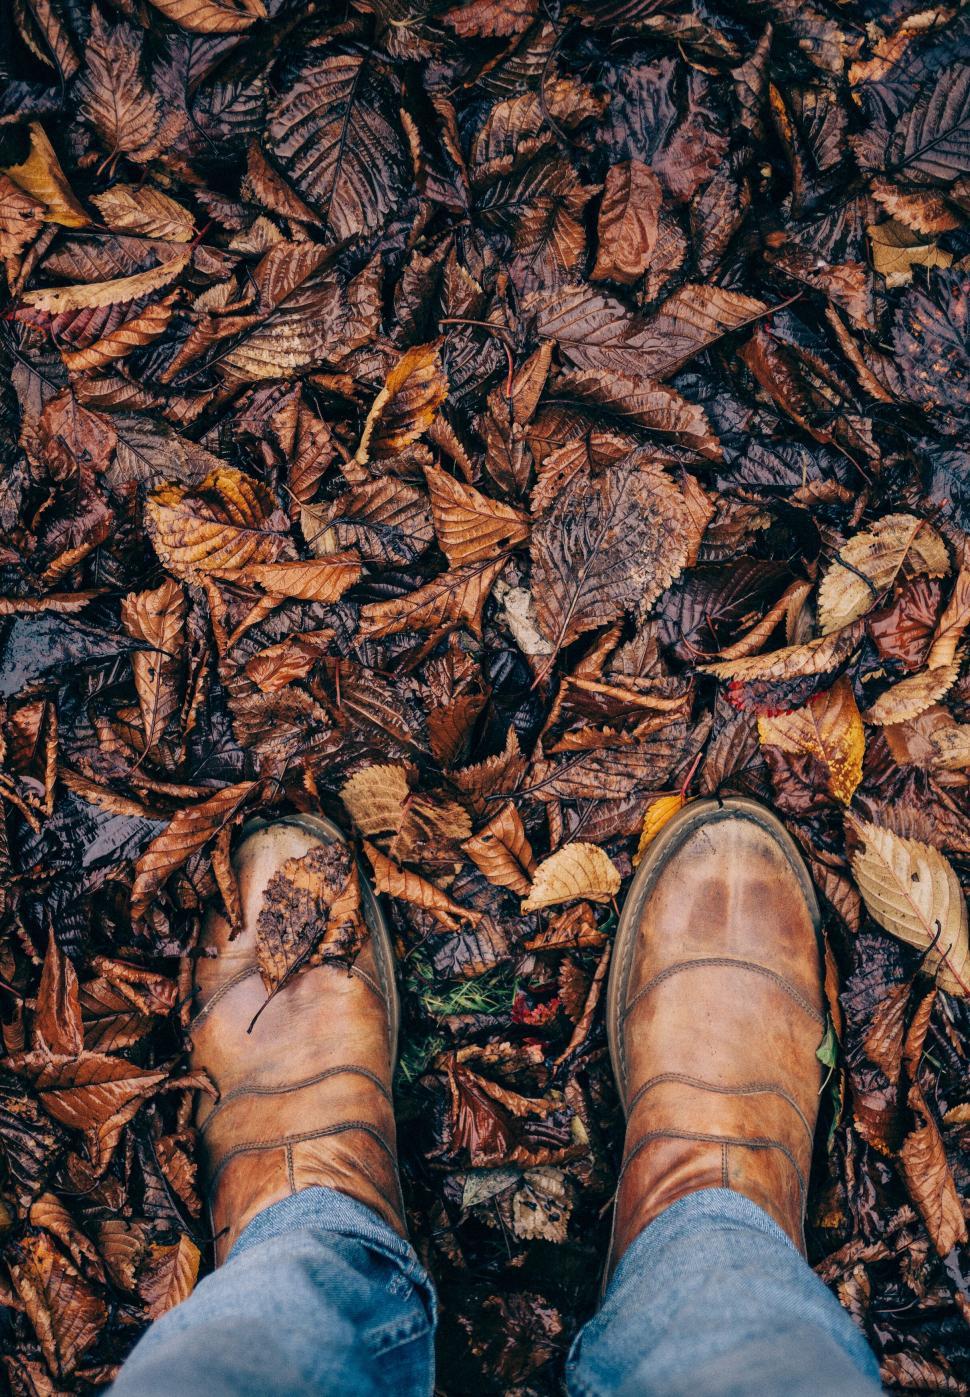 Free Image of Autumn vibes with boots stepping on fallen leaves 